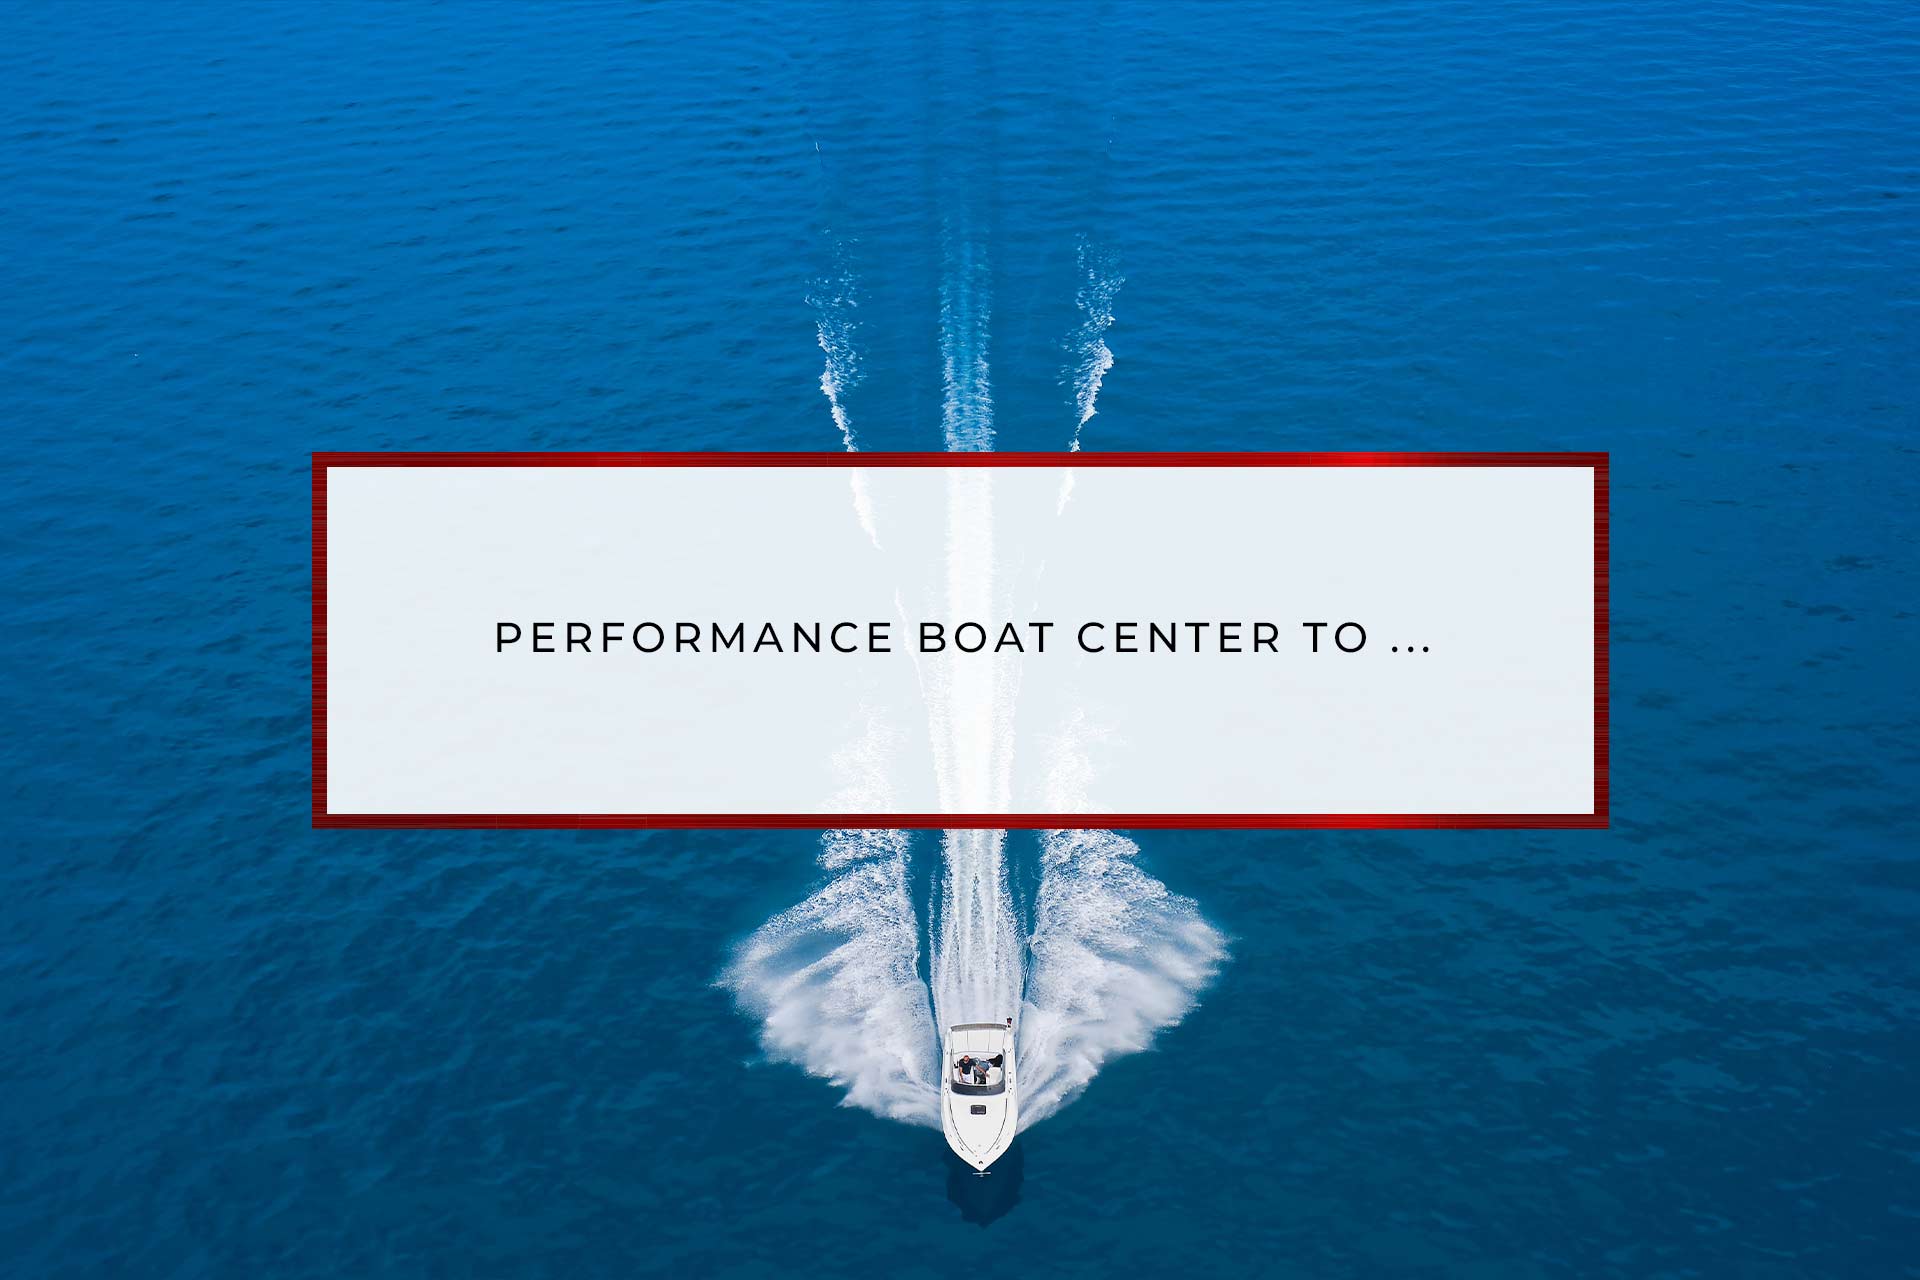 Performance Boat Center To Enjoy Brief Calm From Business Development Storm